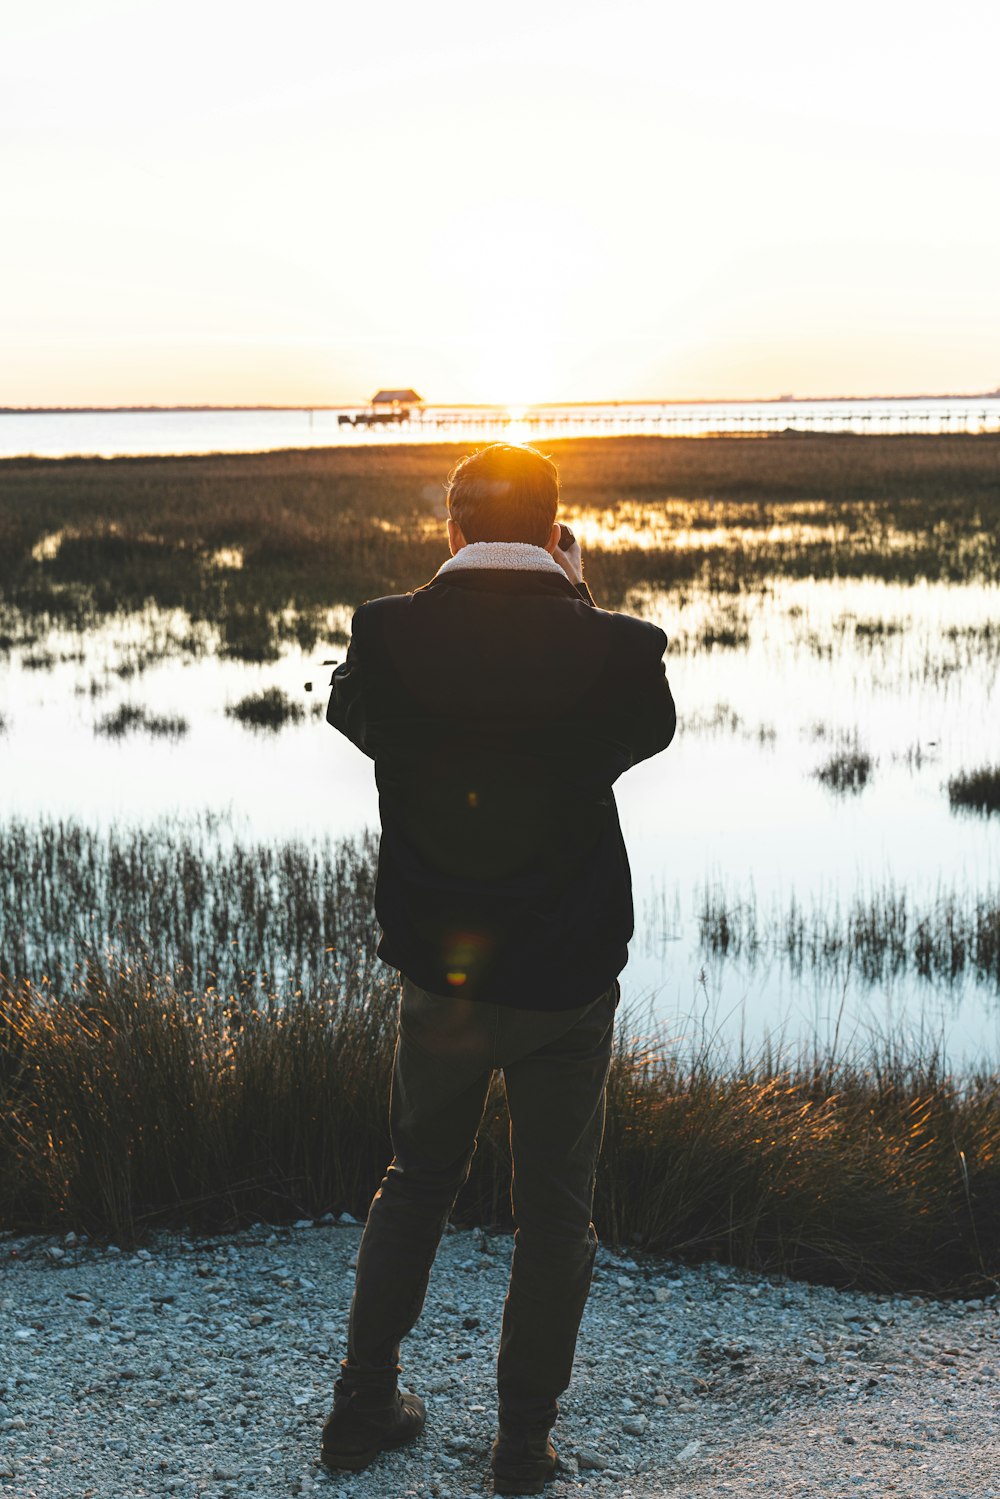 man in black jacket standing on grass field near lake during daytime